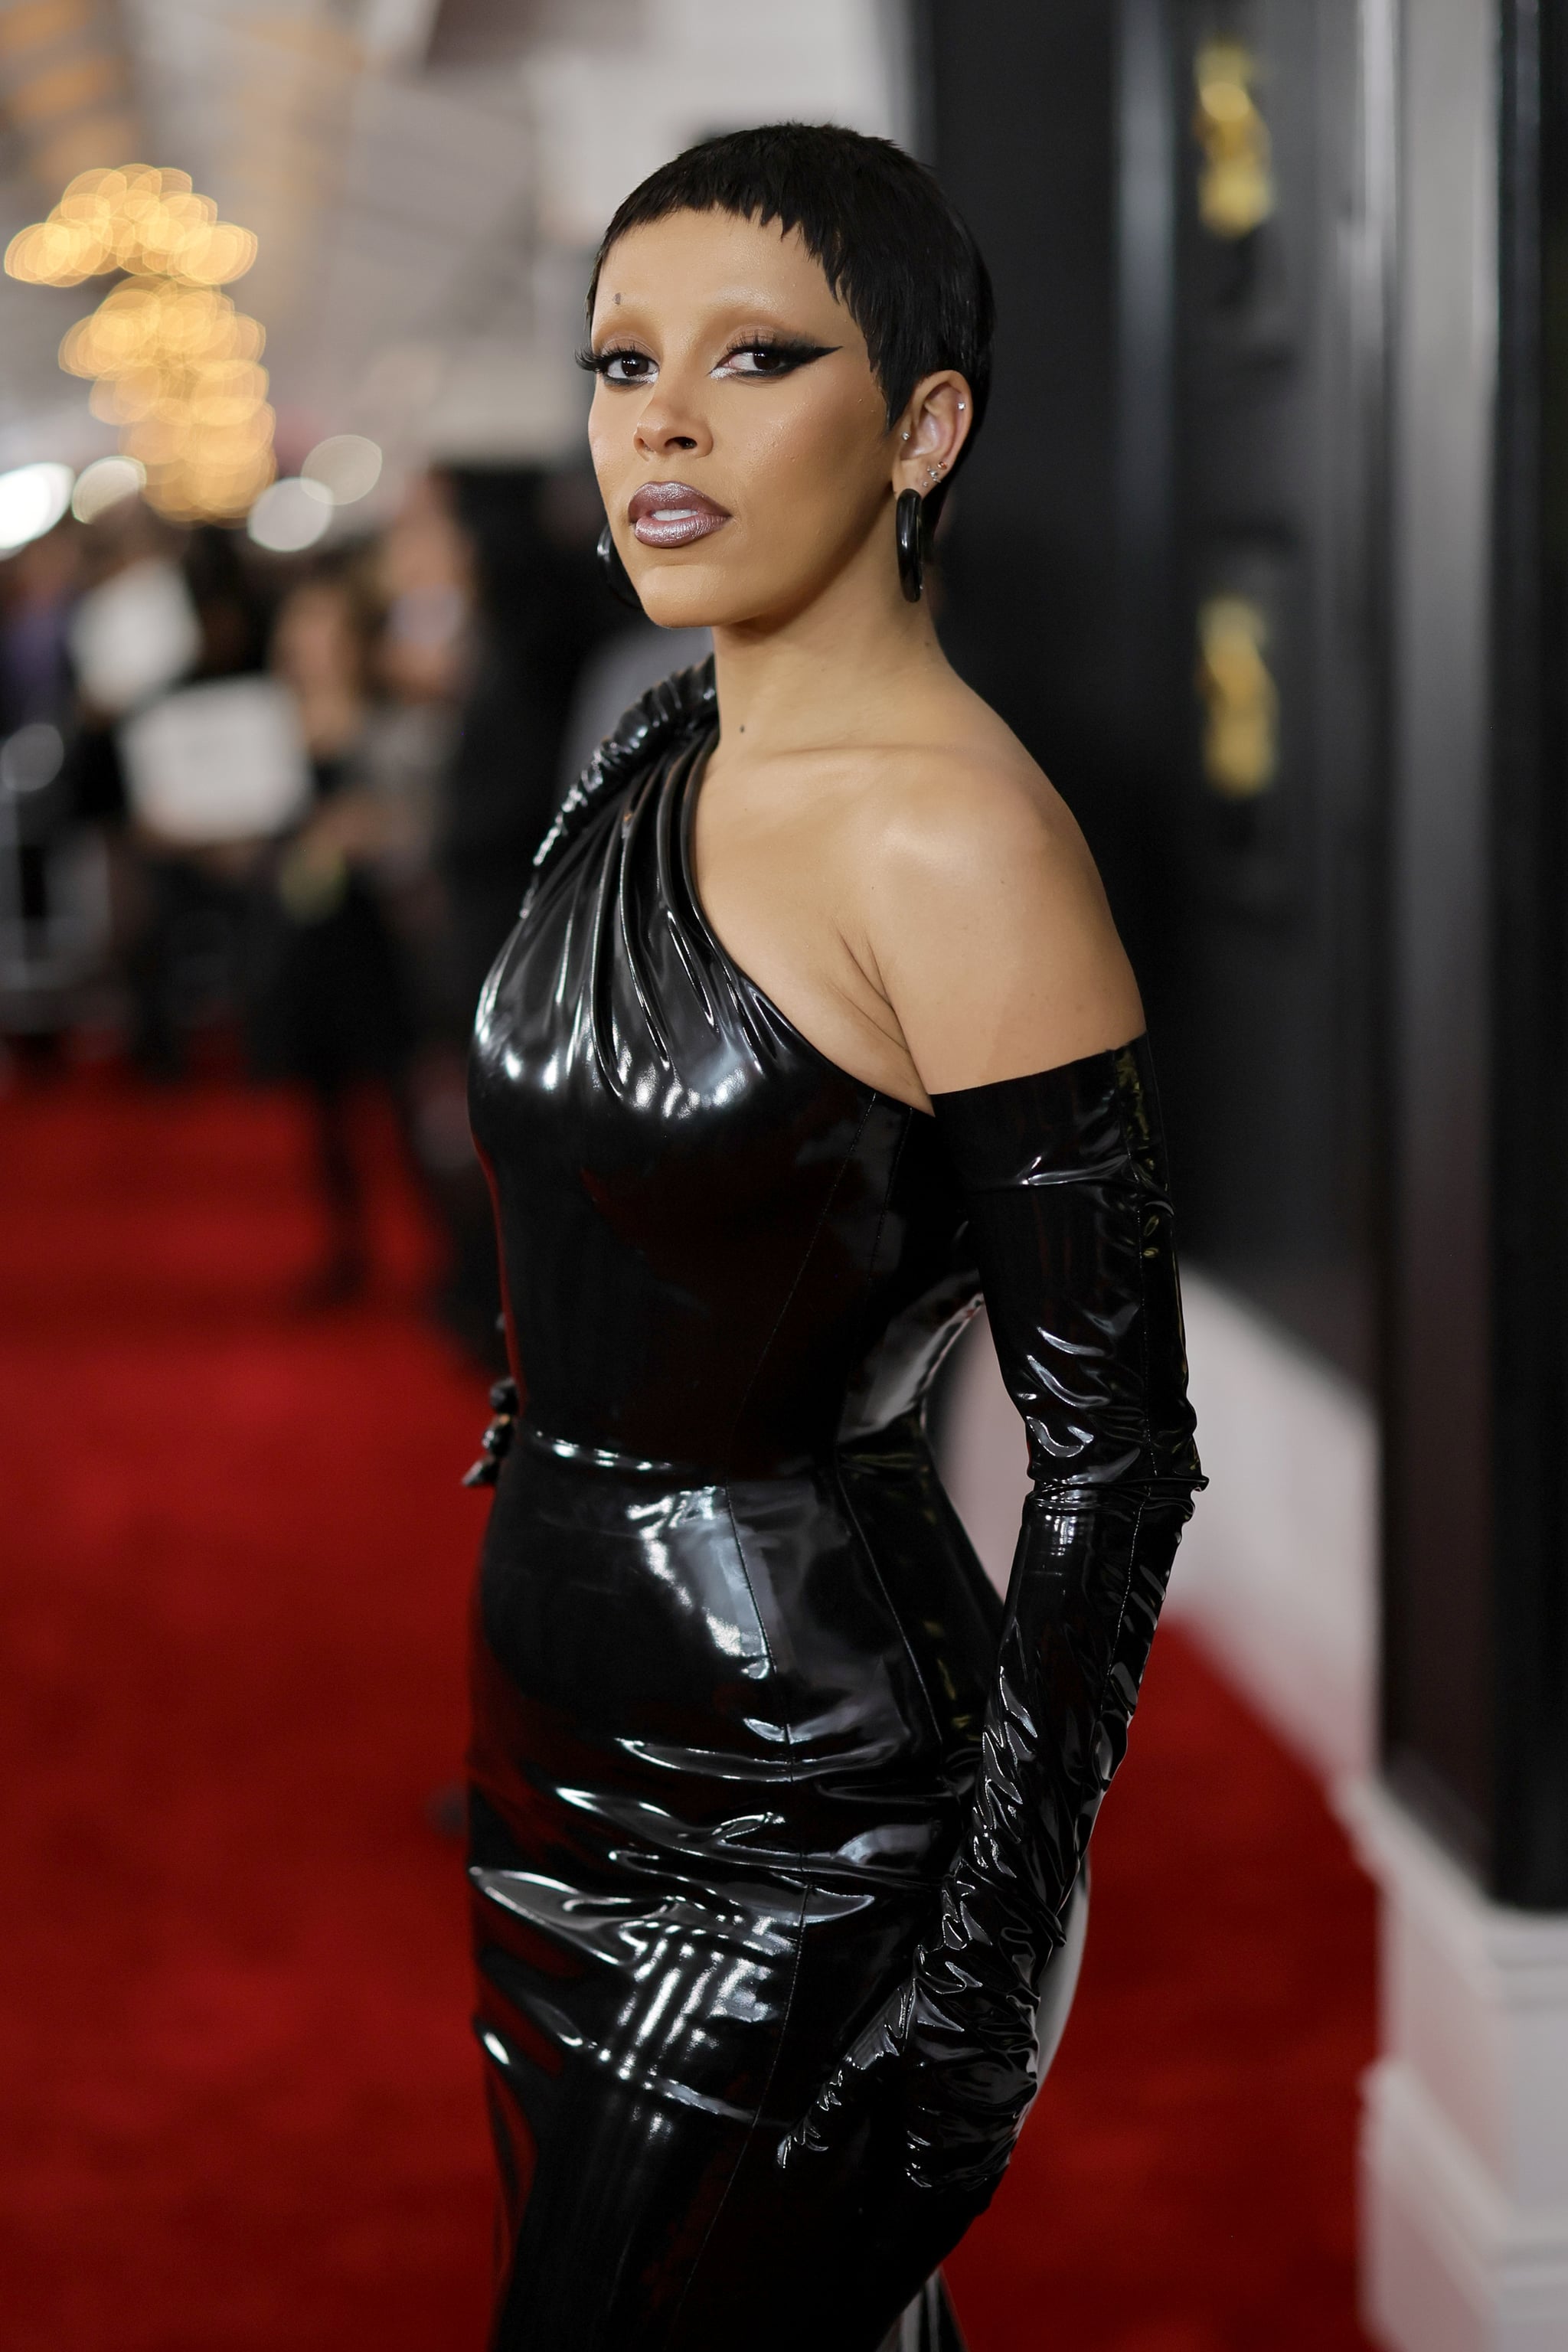 LOS ANGELES, CALIFORNIA - FEBRUARY 05: Doja Cat attends the 65th GRAMMY Awards on February 05, 2023 in Los Angeles, California. (Photo by Neilson Barnard/Getty Images for The Recording Academy)